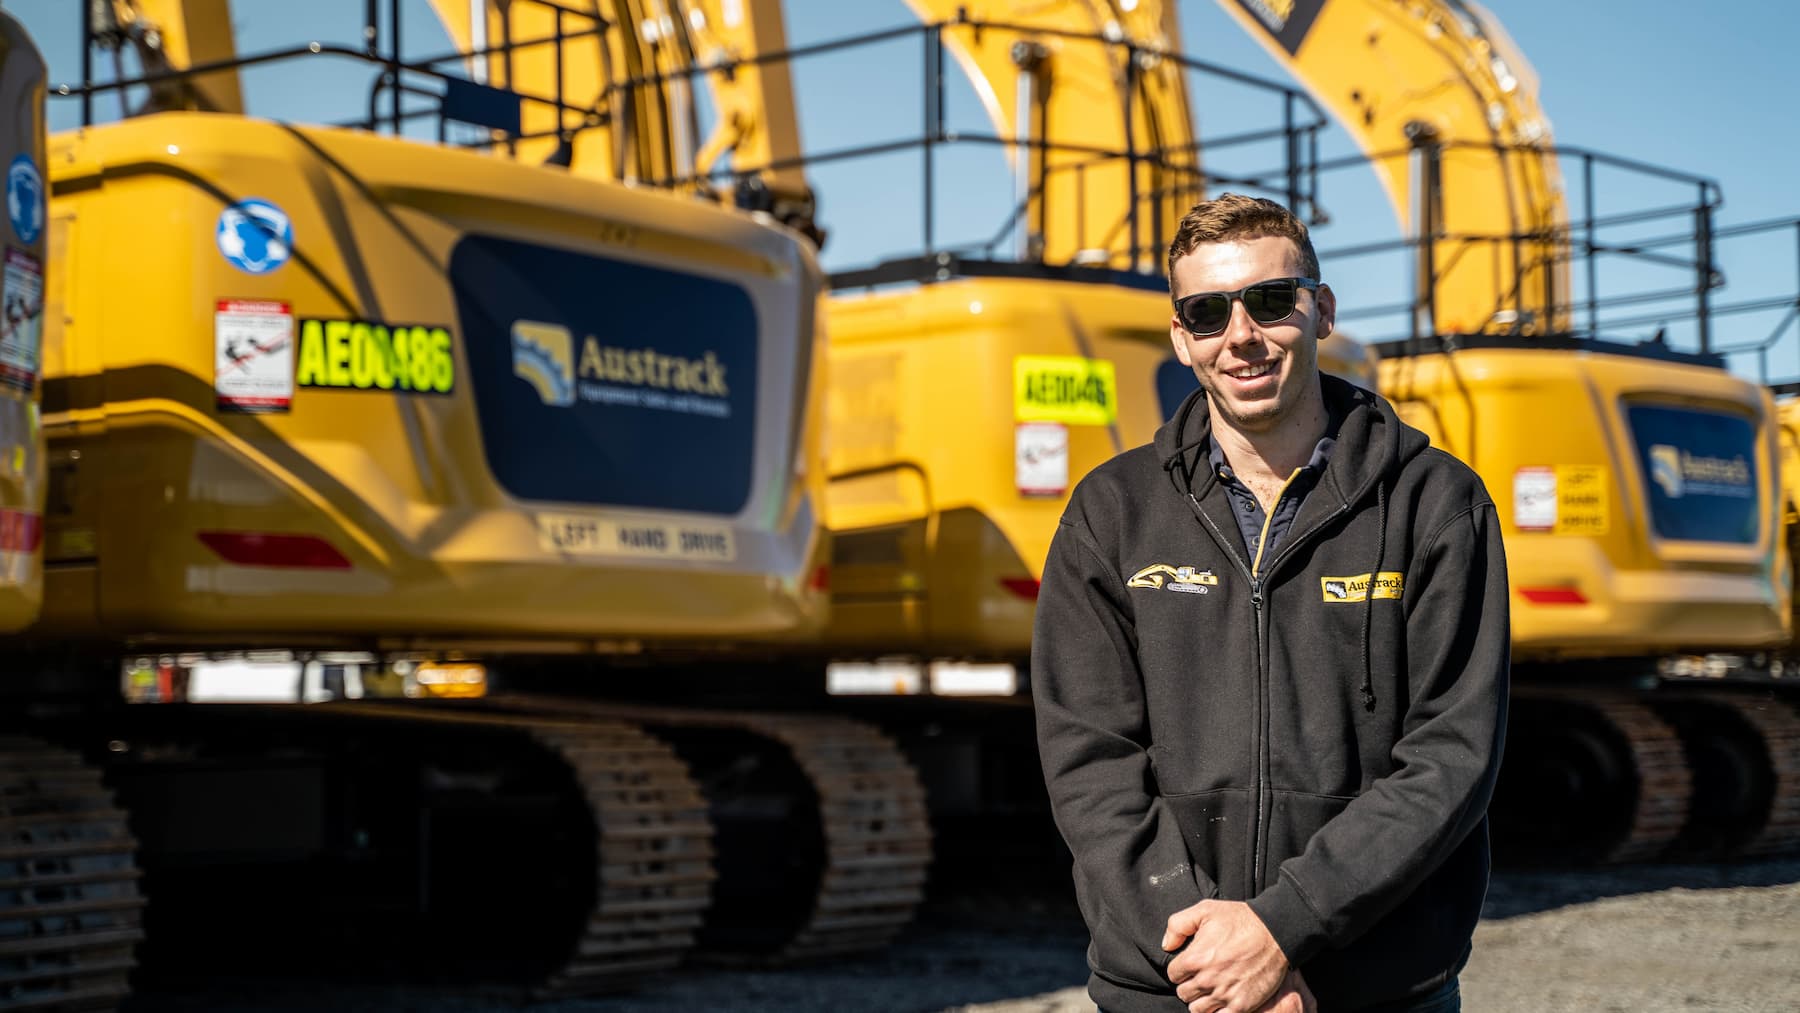 Dylan Gamble from Austrack standing in front of earthmoving equipment